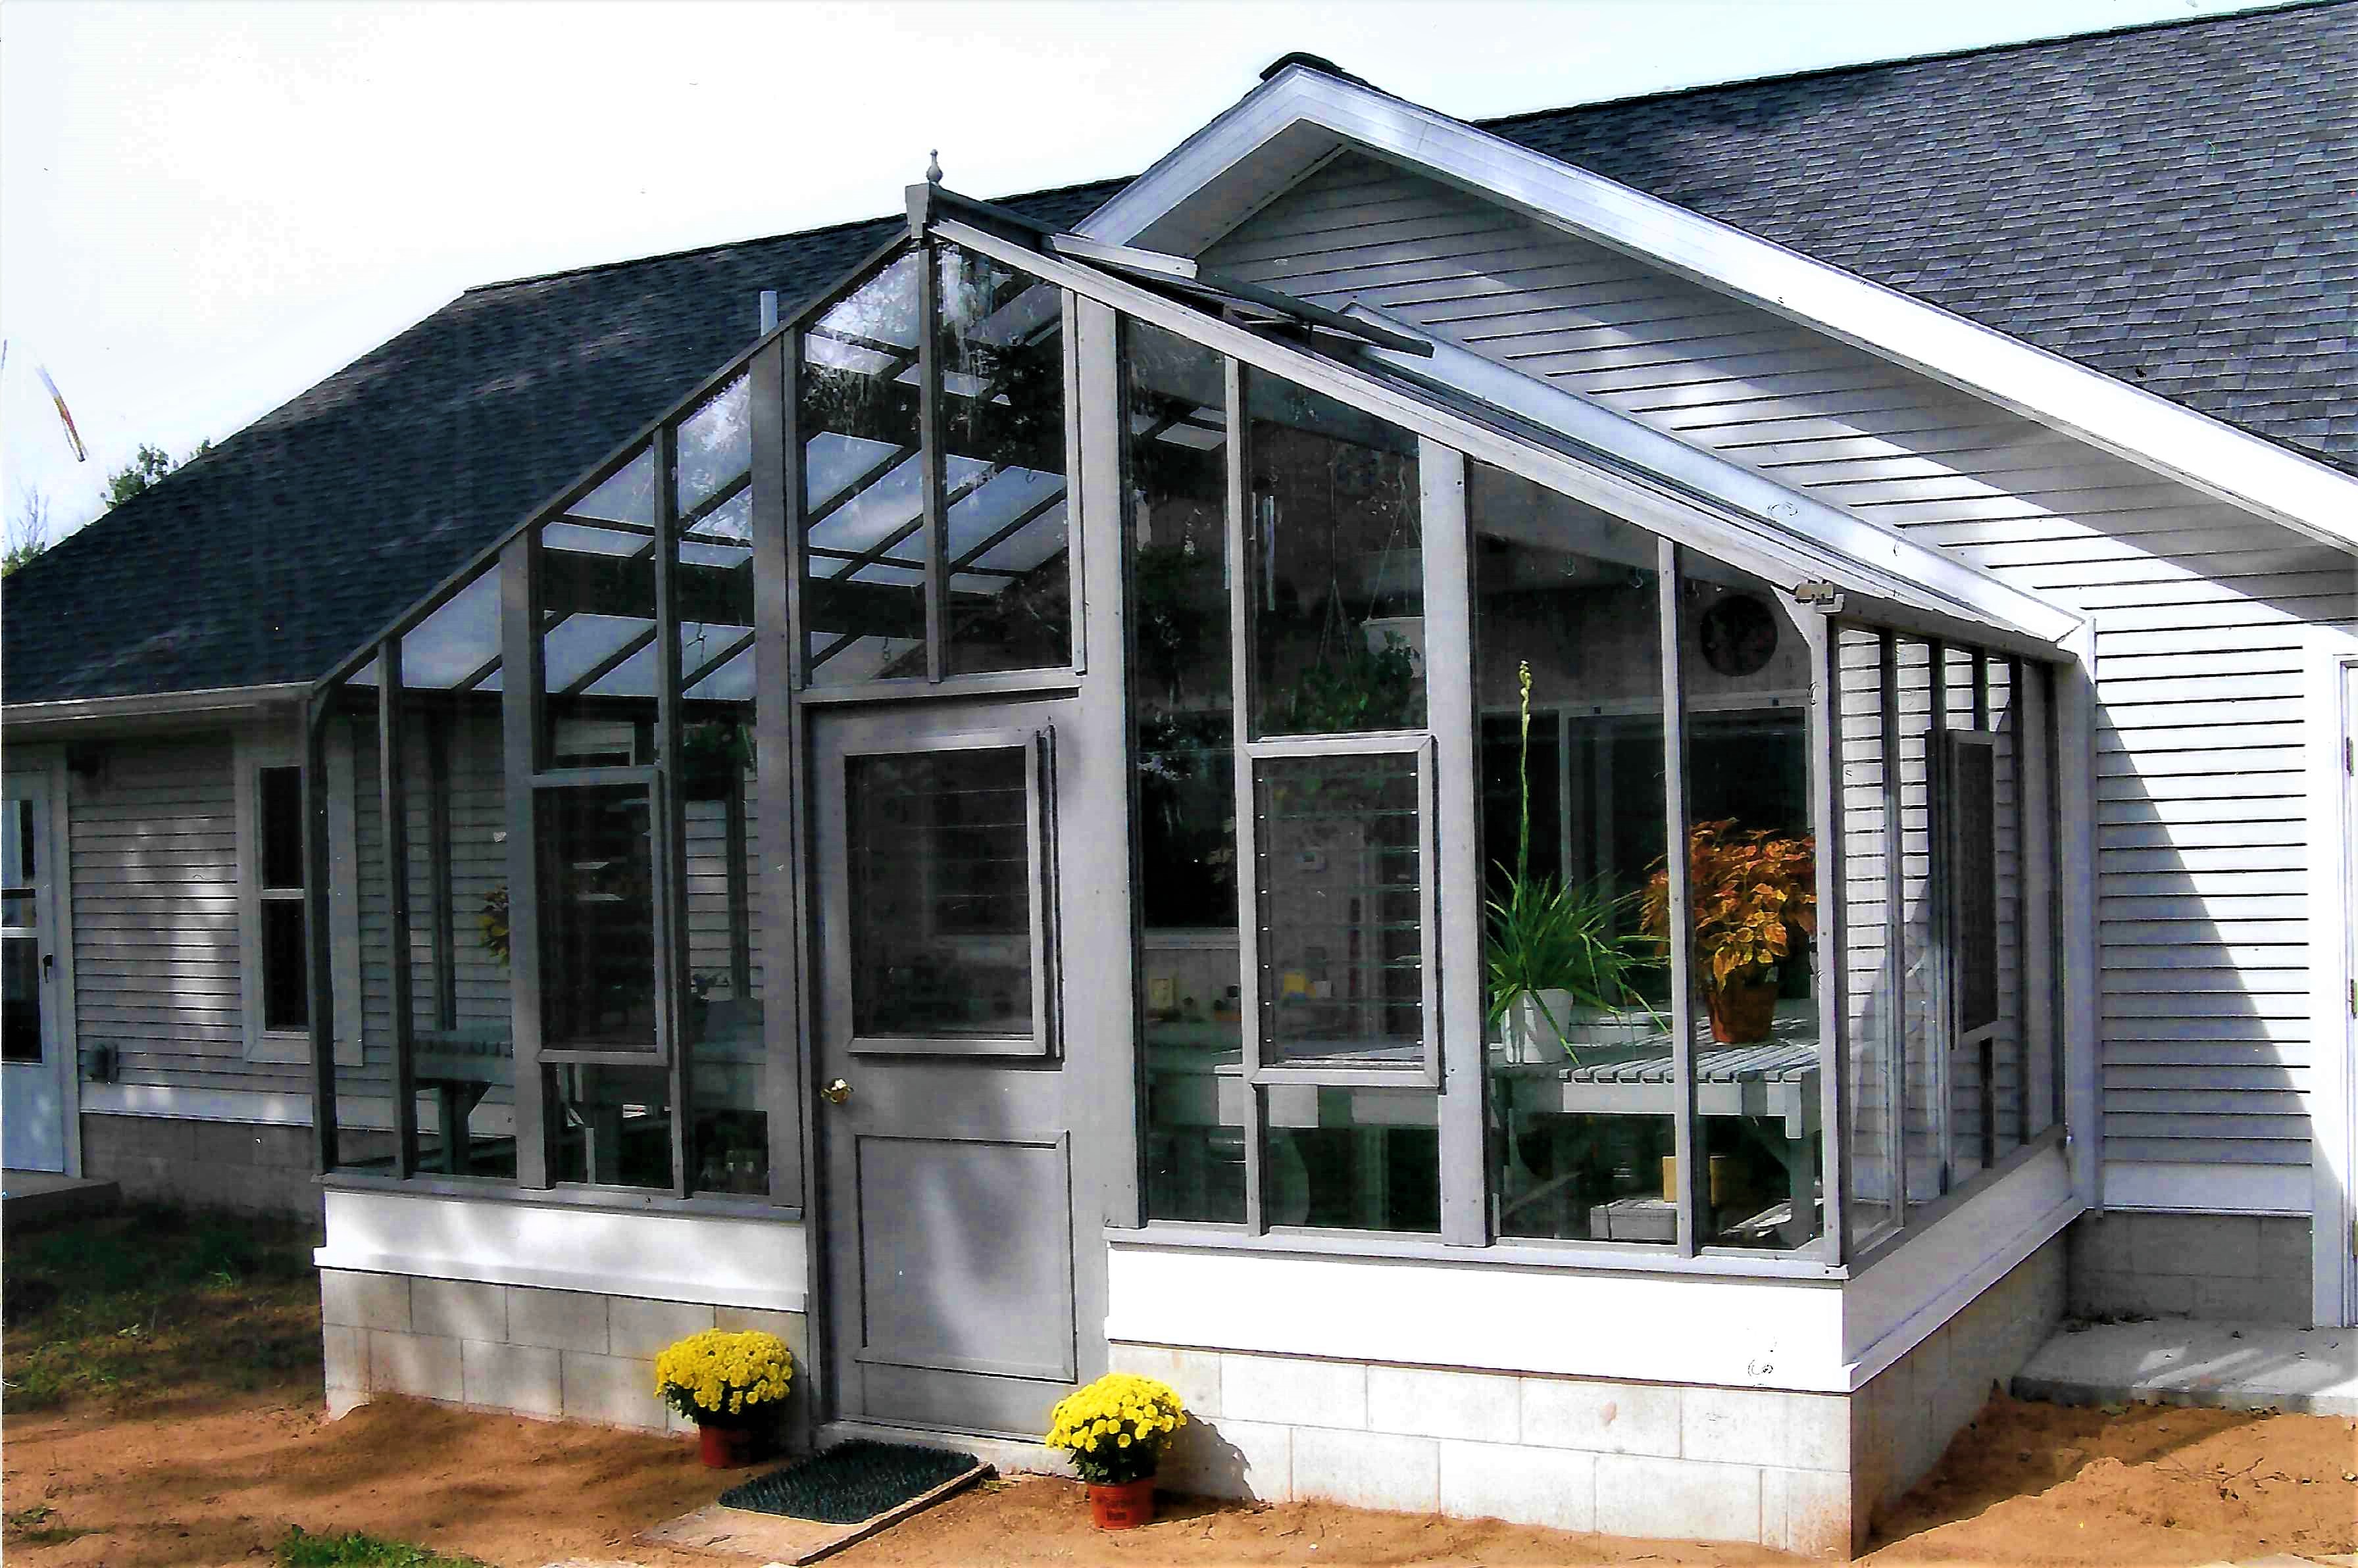 Attached 16' x 9' Deluxe Glass-to-Ground with Jalousie Windows in door and in end wall on 18" high block wall